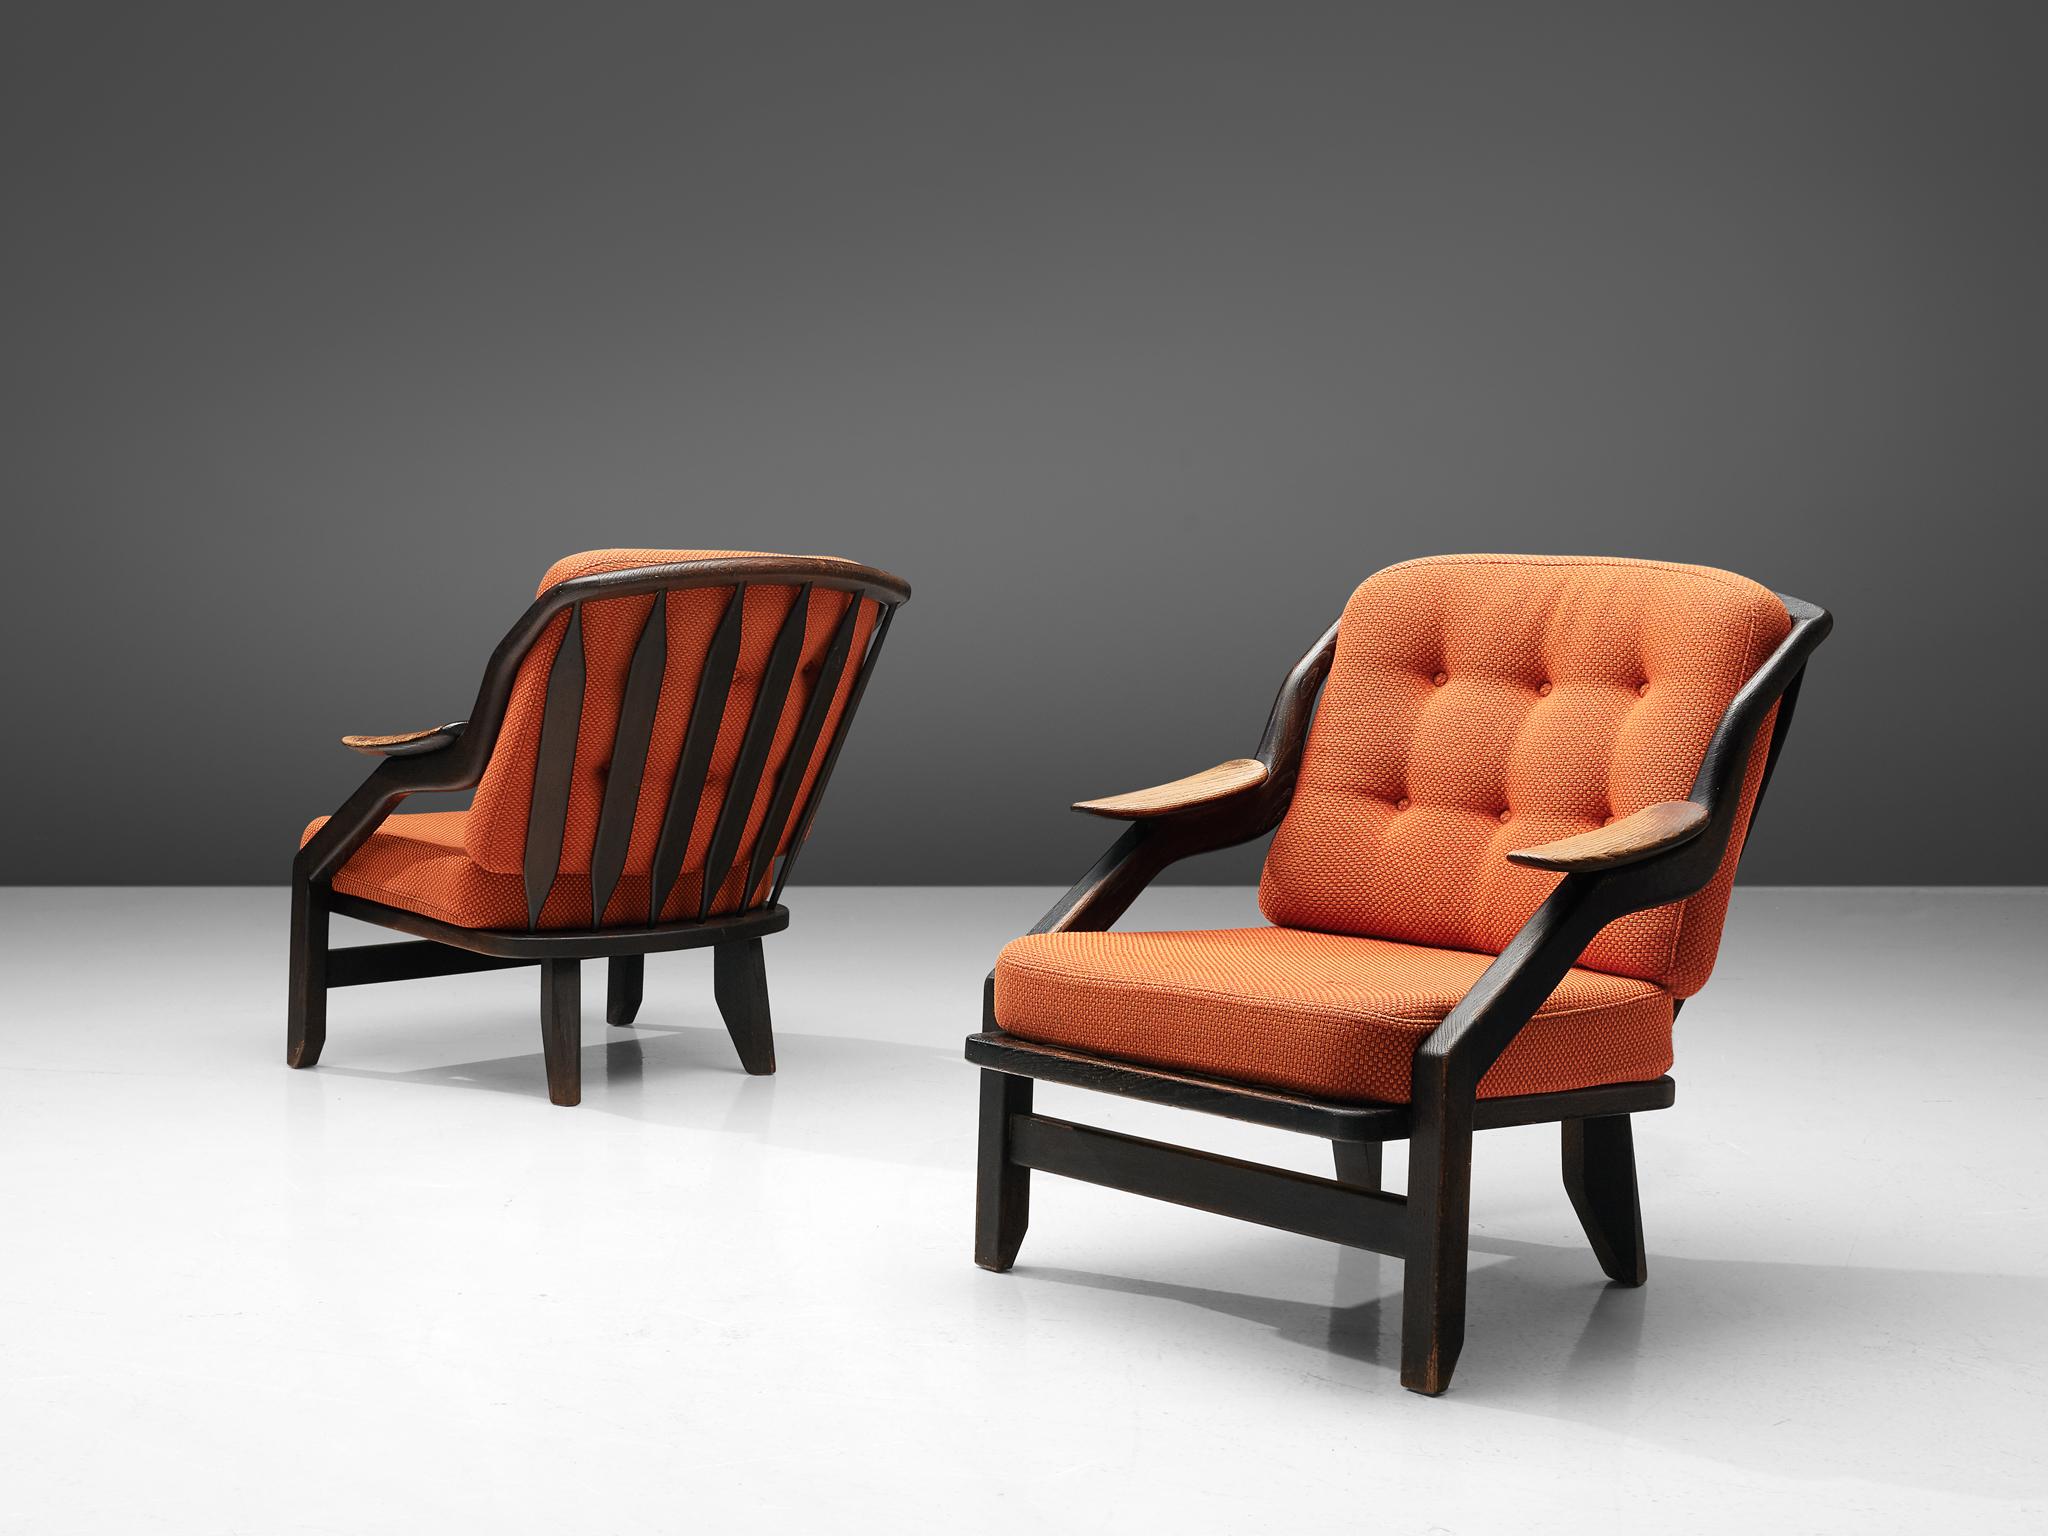 Guillerme & Chambron, pair of lounge chairs, orange fabric and dark stained oak, France, 1950s.

A pair of lounge chairs by Guillerme et Chambron, this French designer duo is known for their extreme high quality solid oak furniture, from which this